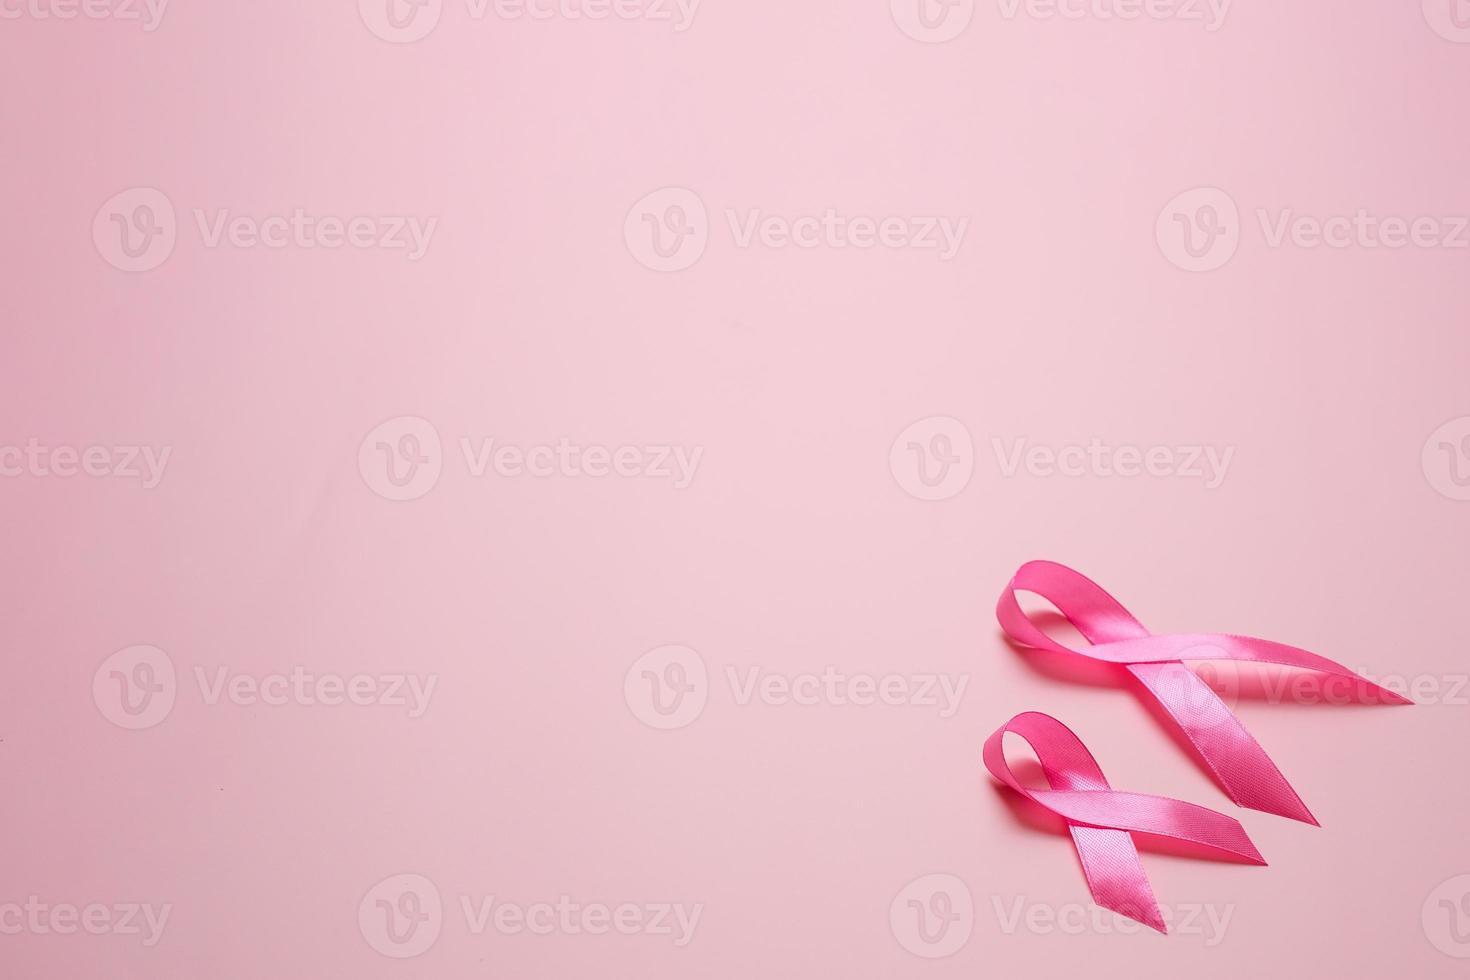 Breast cancer awareness flatlay concept photo